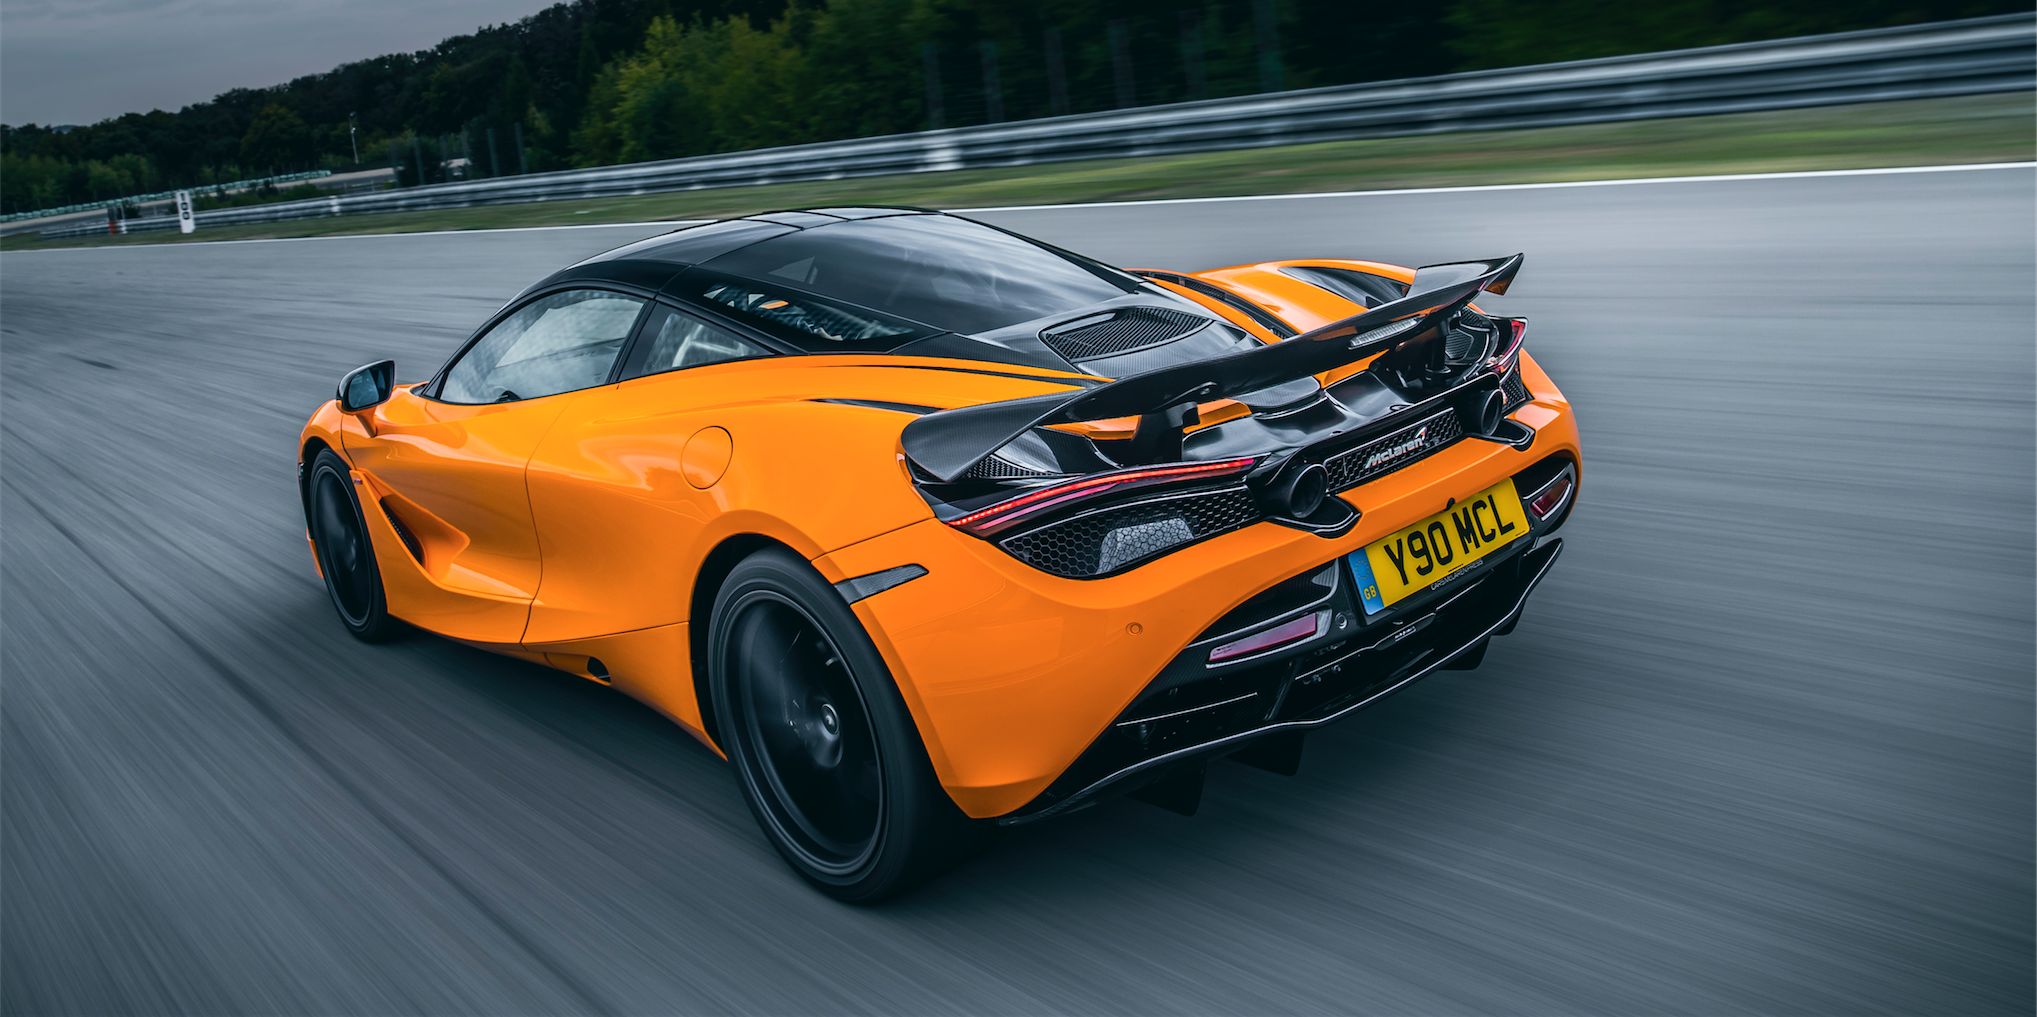 2019 McLaren 720S Track Pack Revealed - Lightweight 720S Specs, Pictures,  Pricing